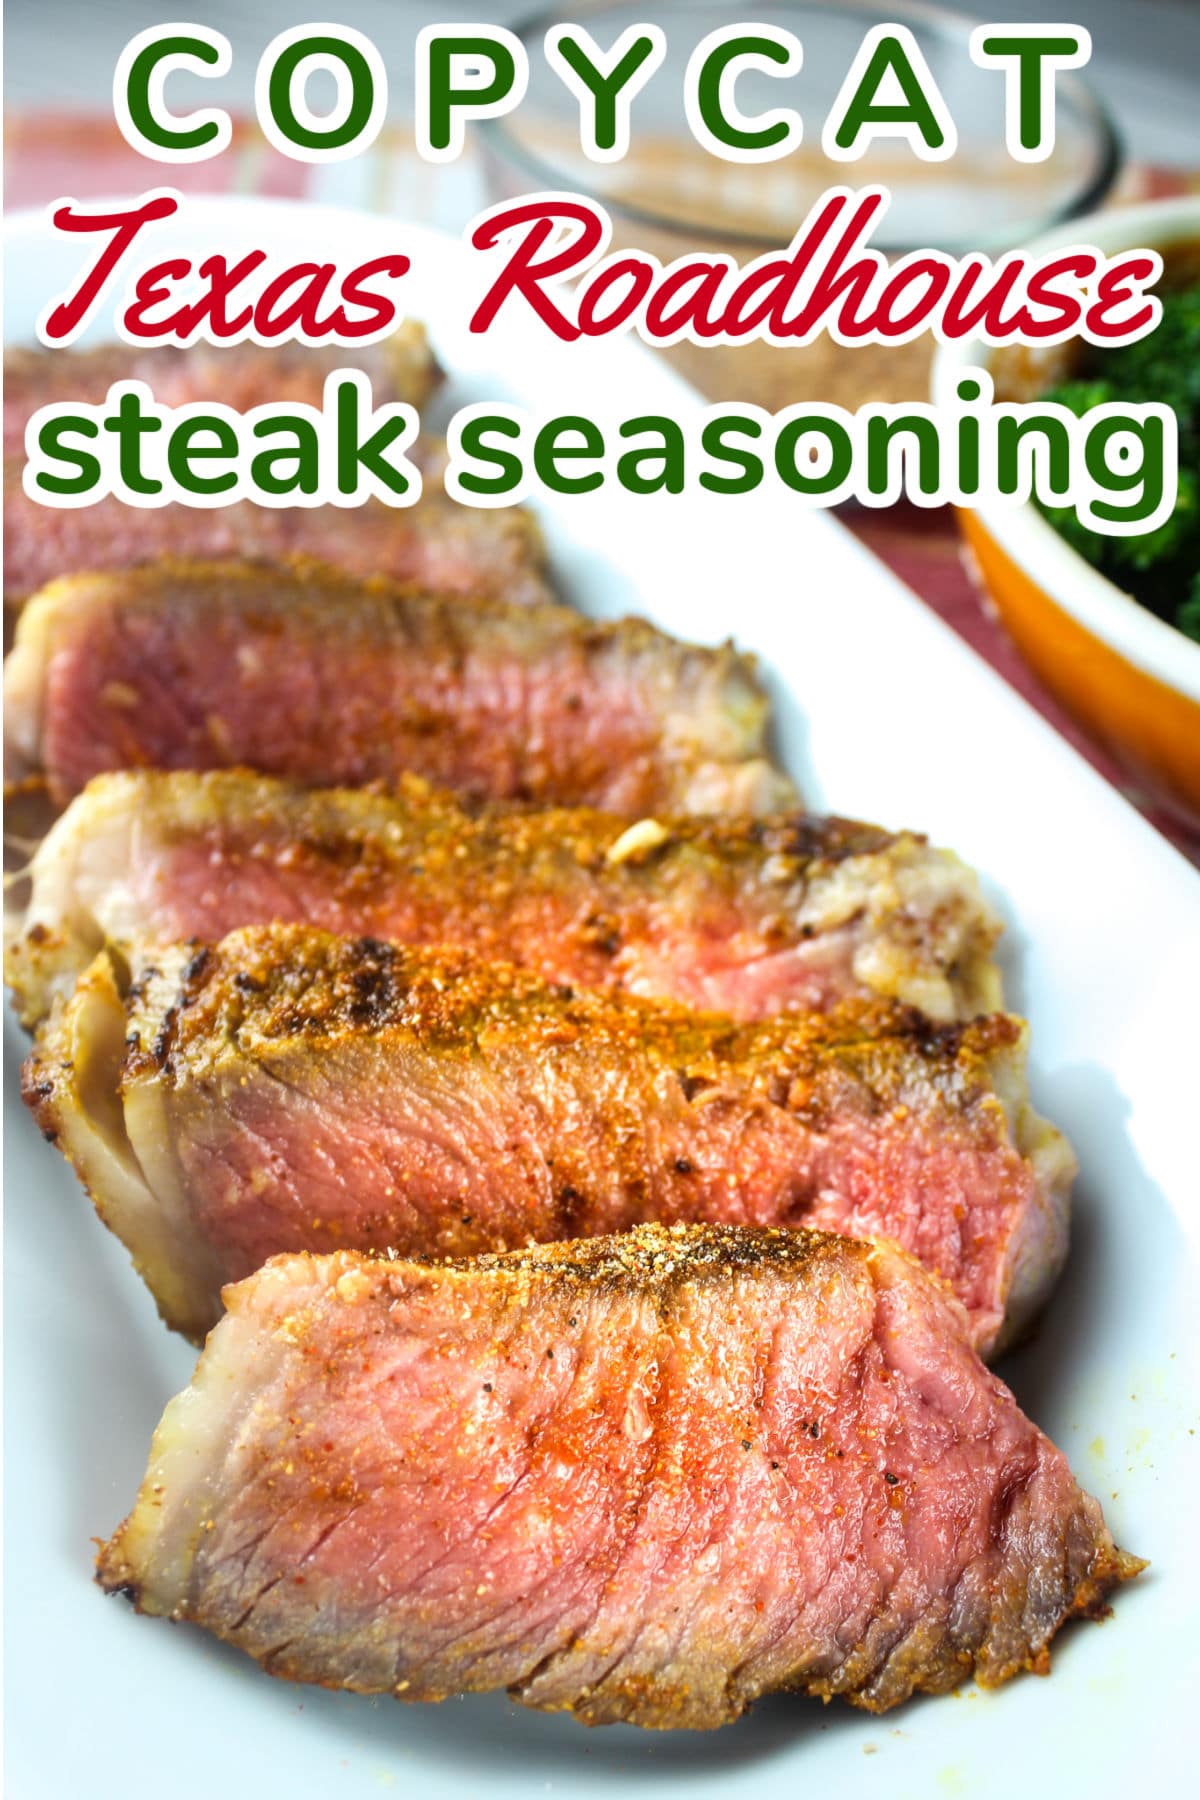 This Copycat Texas Roadhouse Steak Seasoning is dead-on to the real thing! How do I know? I went to Texas Roadhouse and asked for some seasoning on the side! Then I took it home to copycat it! I did a side-by-side taste & create to make my own copycat version. via @foodhussy